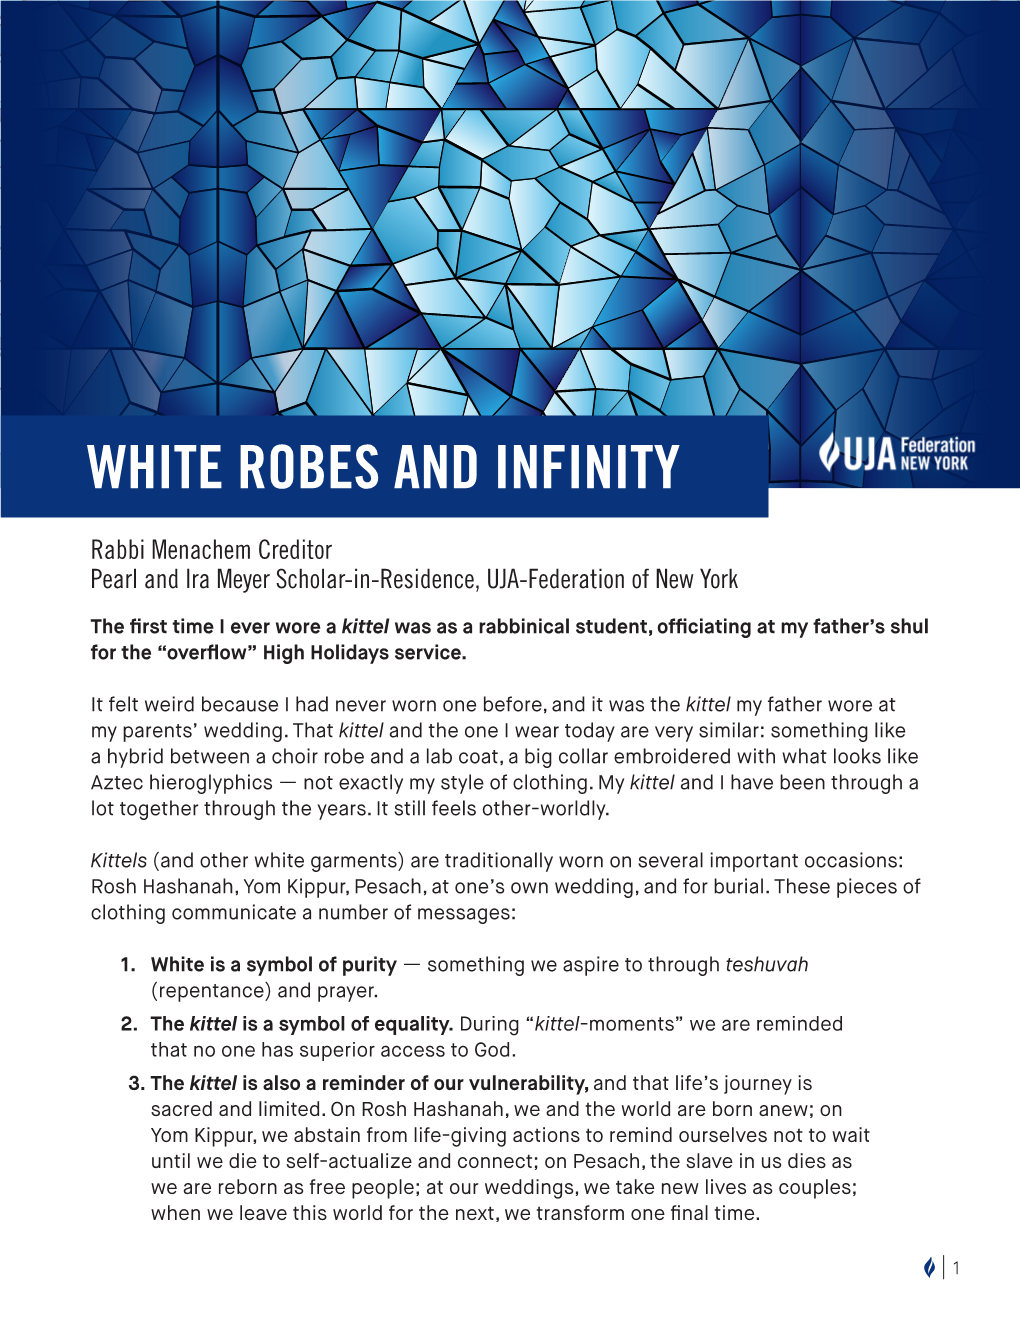 White Robes and Infinity